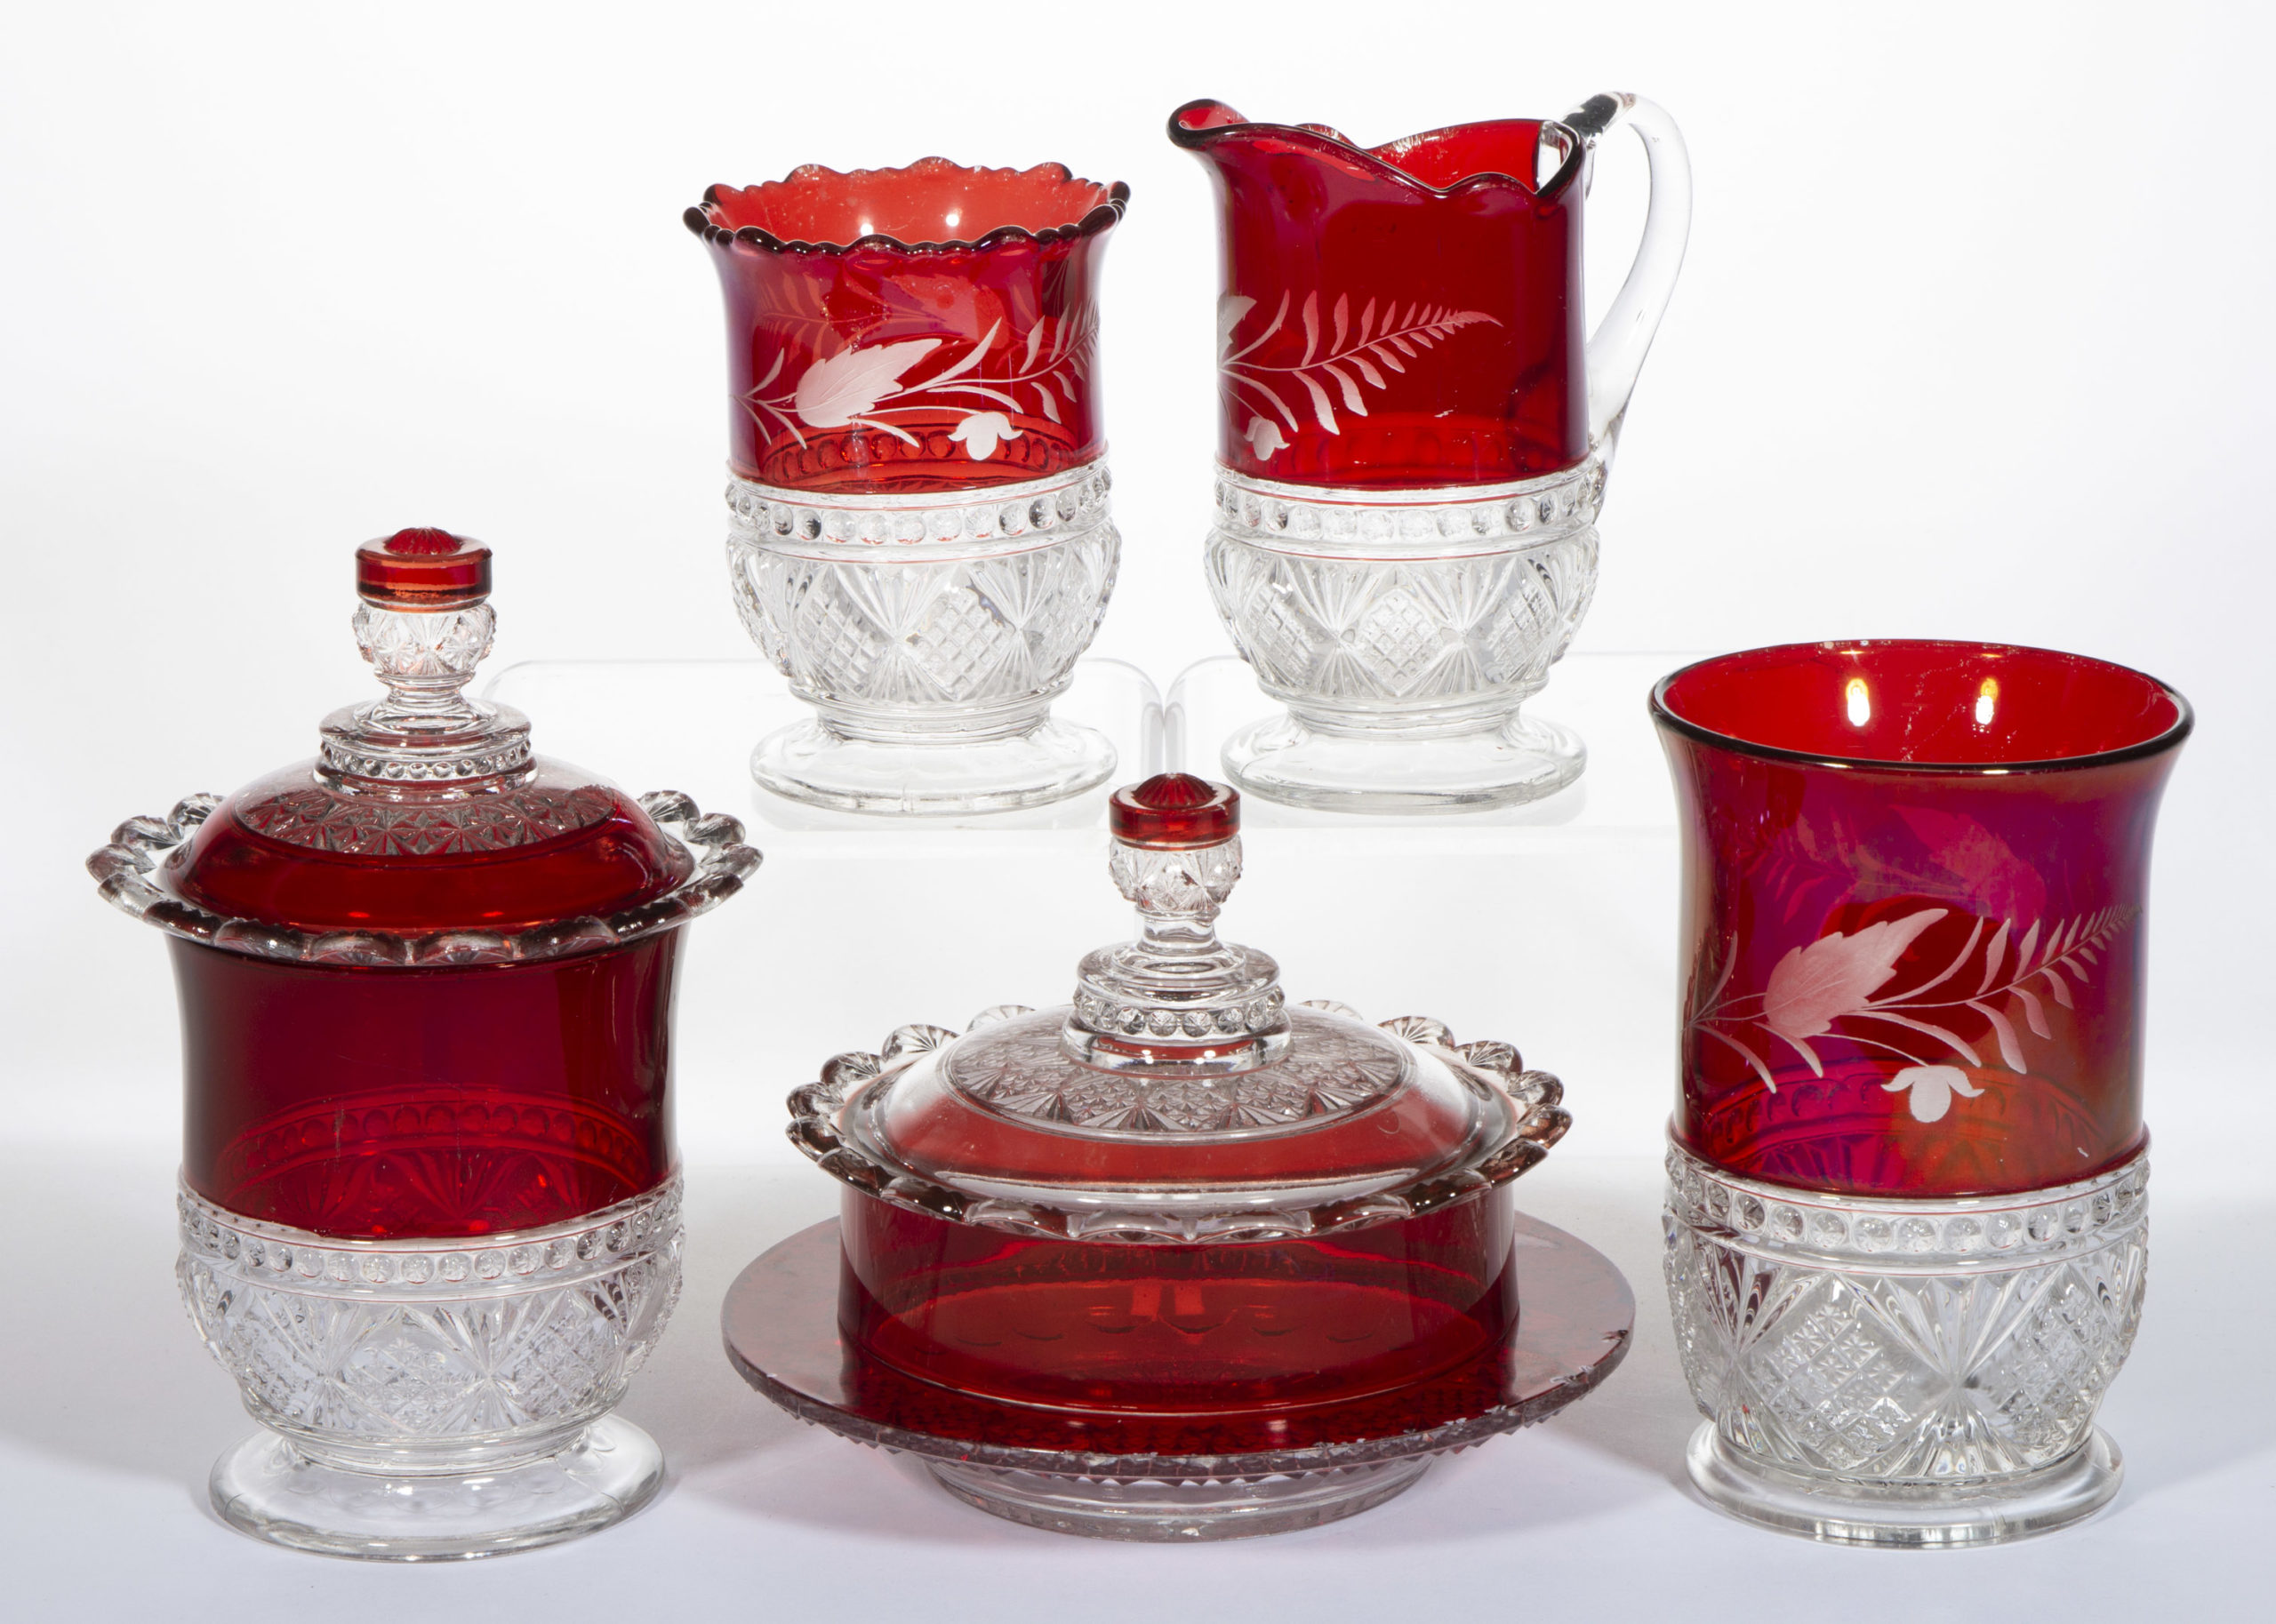 MELROSE / DIAMOND BEADED BAND – RUBY-STAINED FIVE-PIECE TABLE SET,